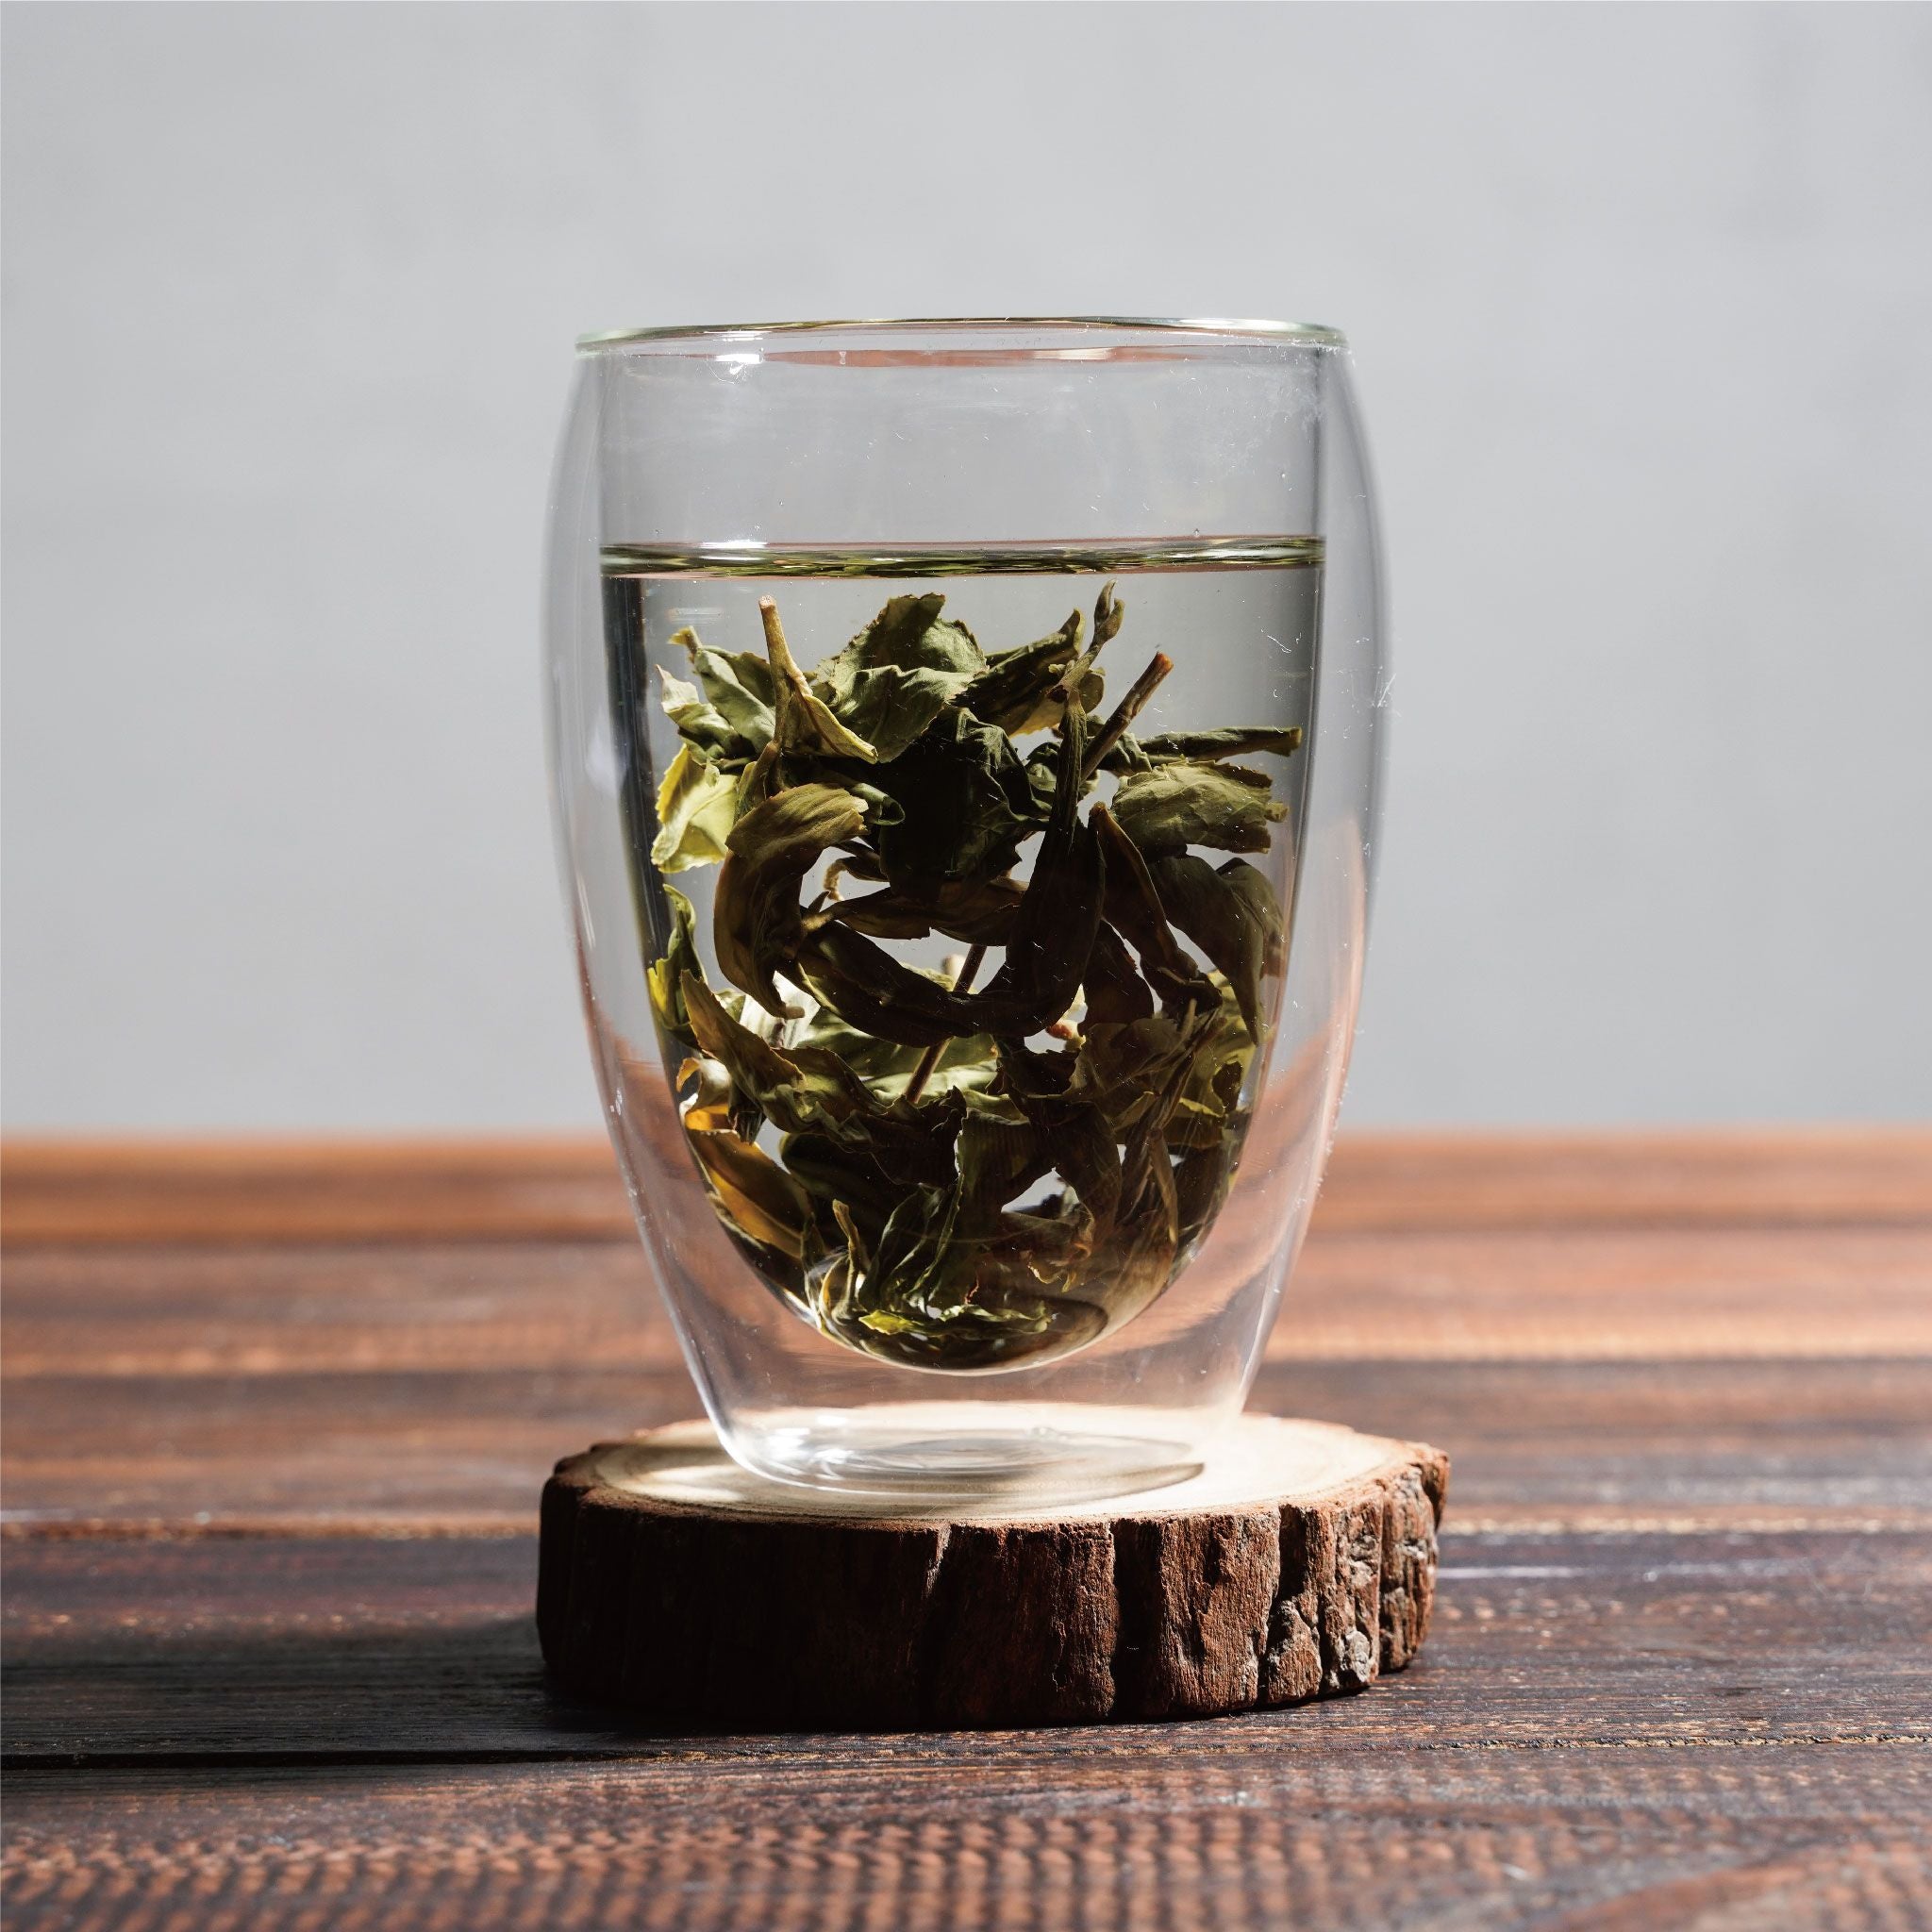 bao zhong wrapped kind wet leaves floating in cup